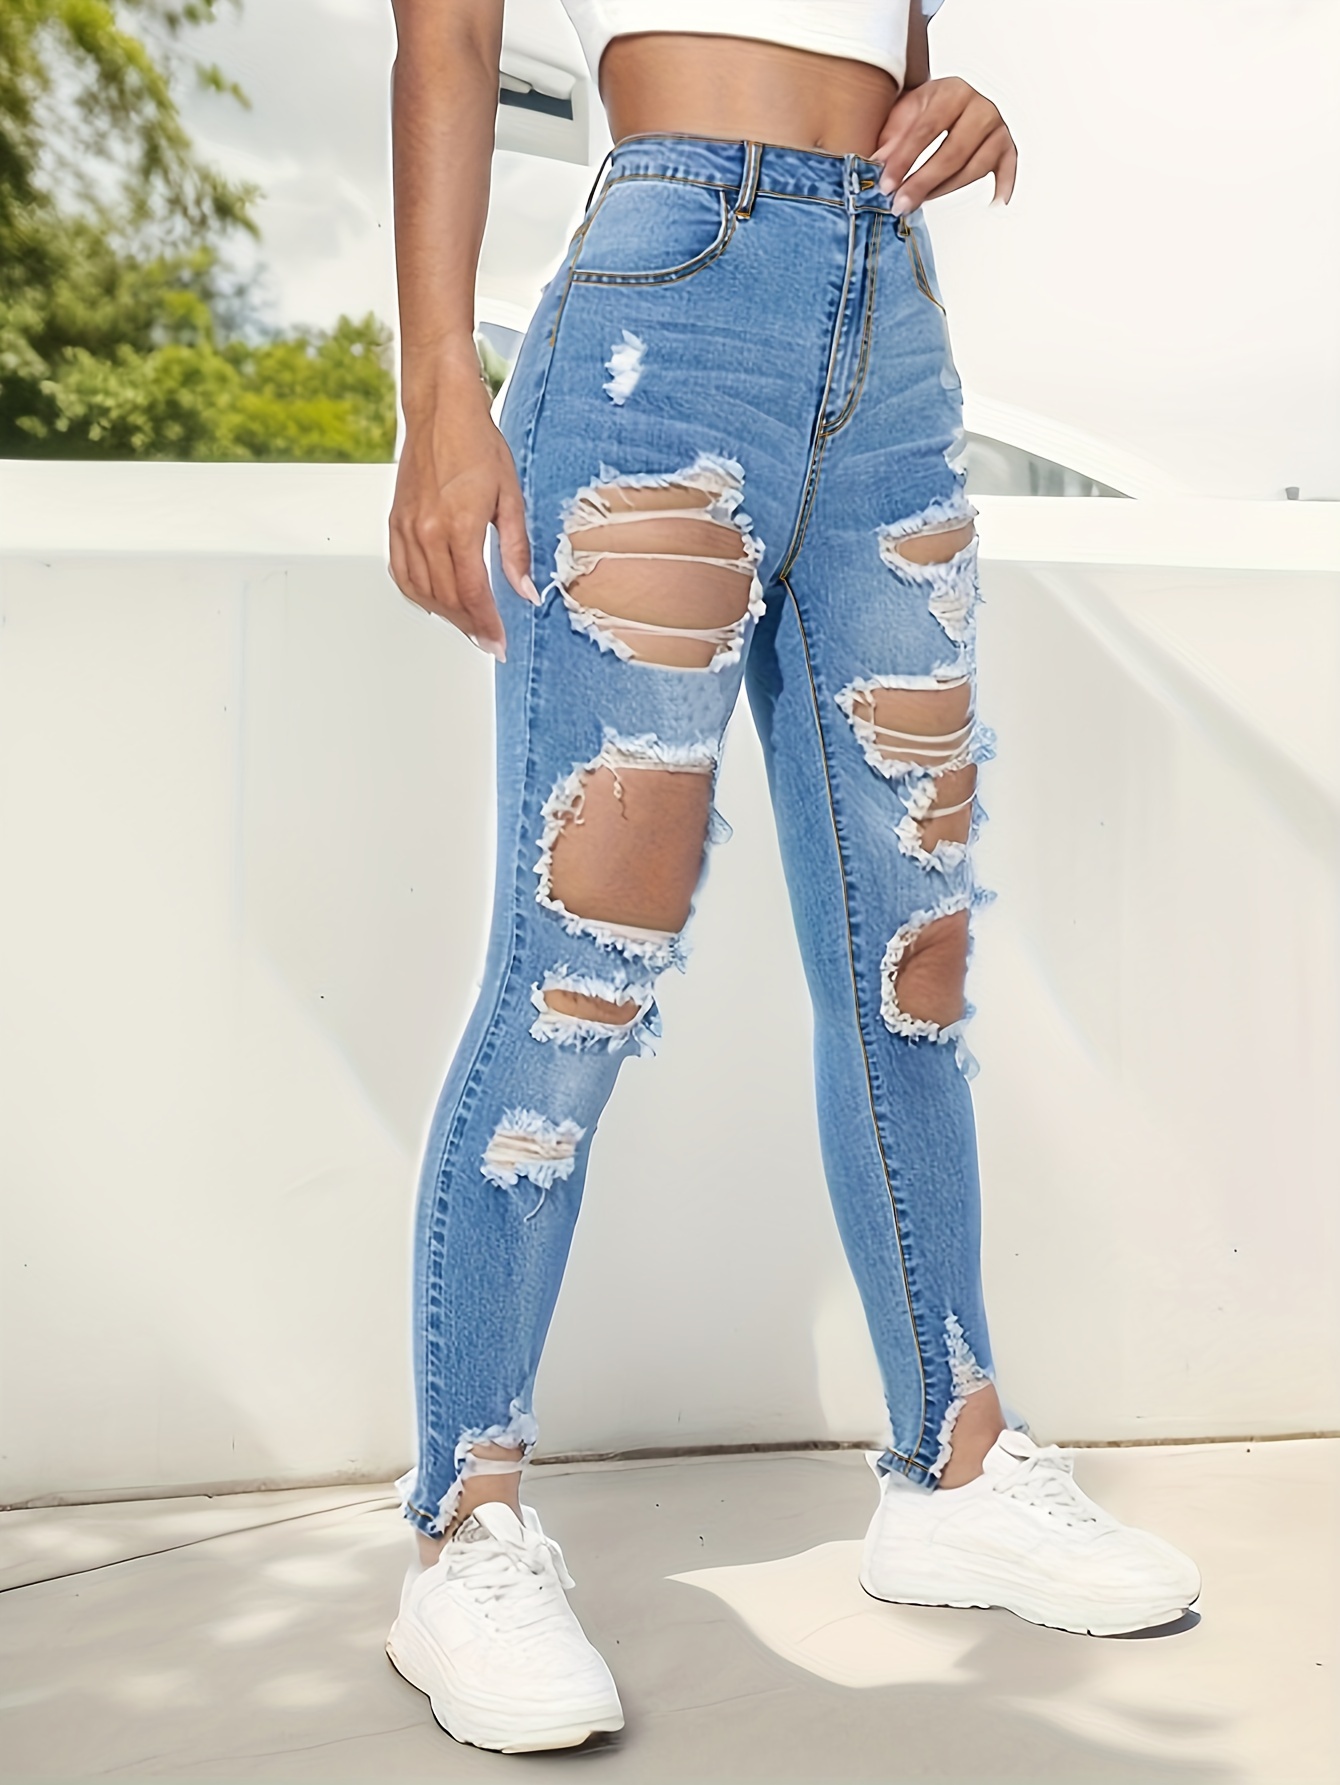 Skinny Jeans For Women, Tight Jeans